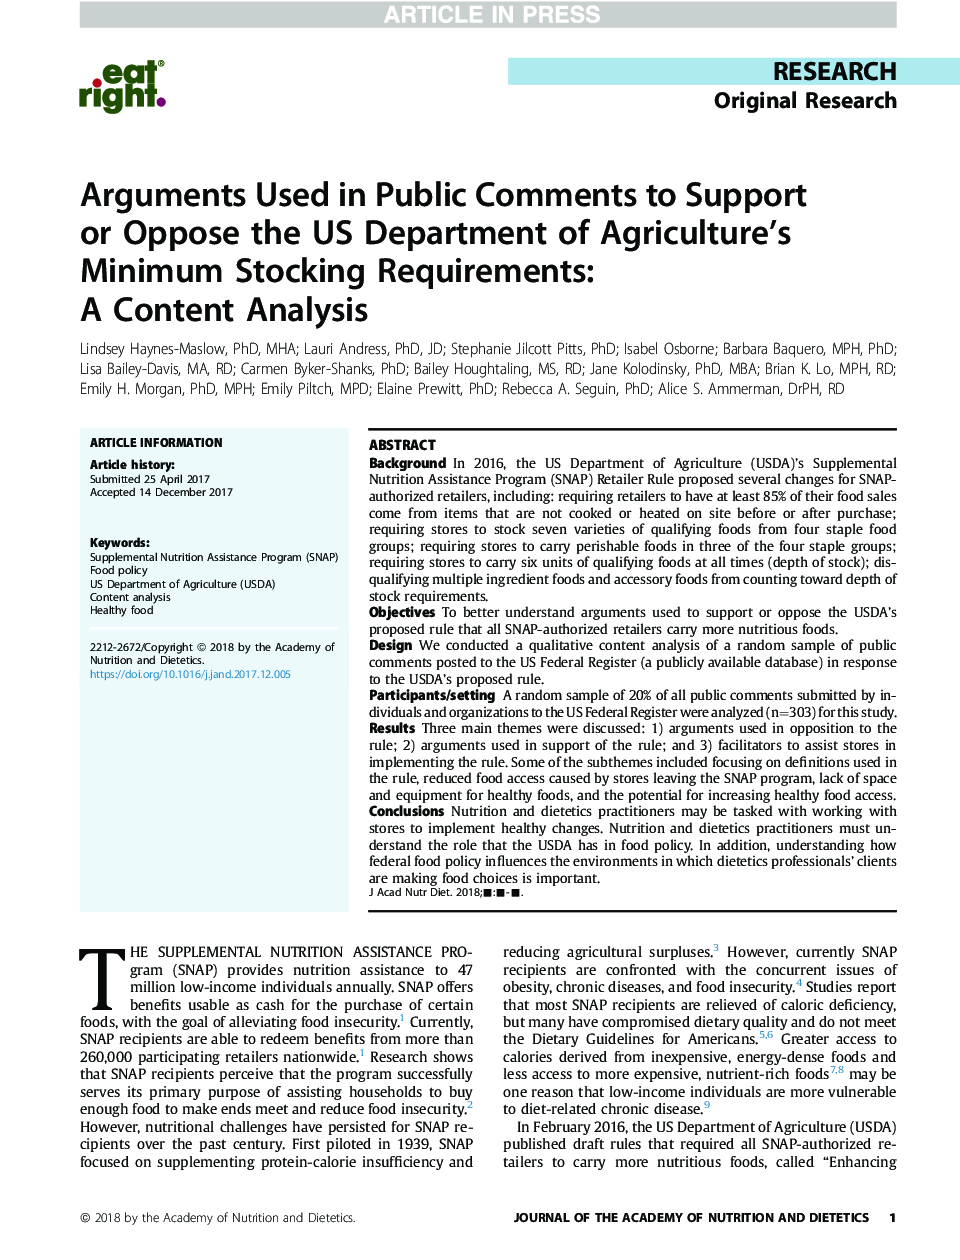 Arguments Used in Public Comments to Support or Oppose the US Department of Agriculture's Minimum Stocking Requirements: A Content Analysis